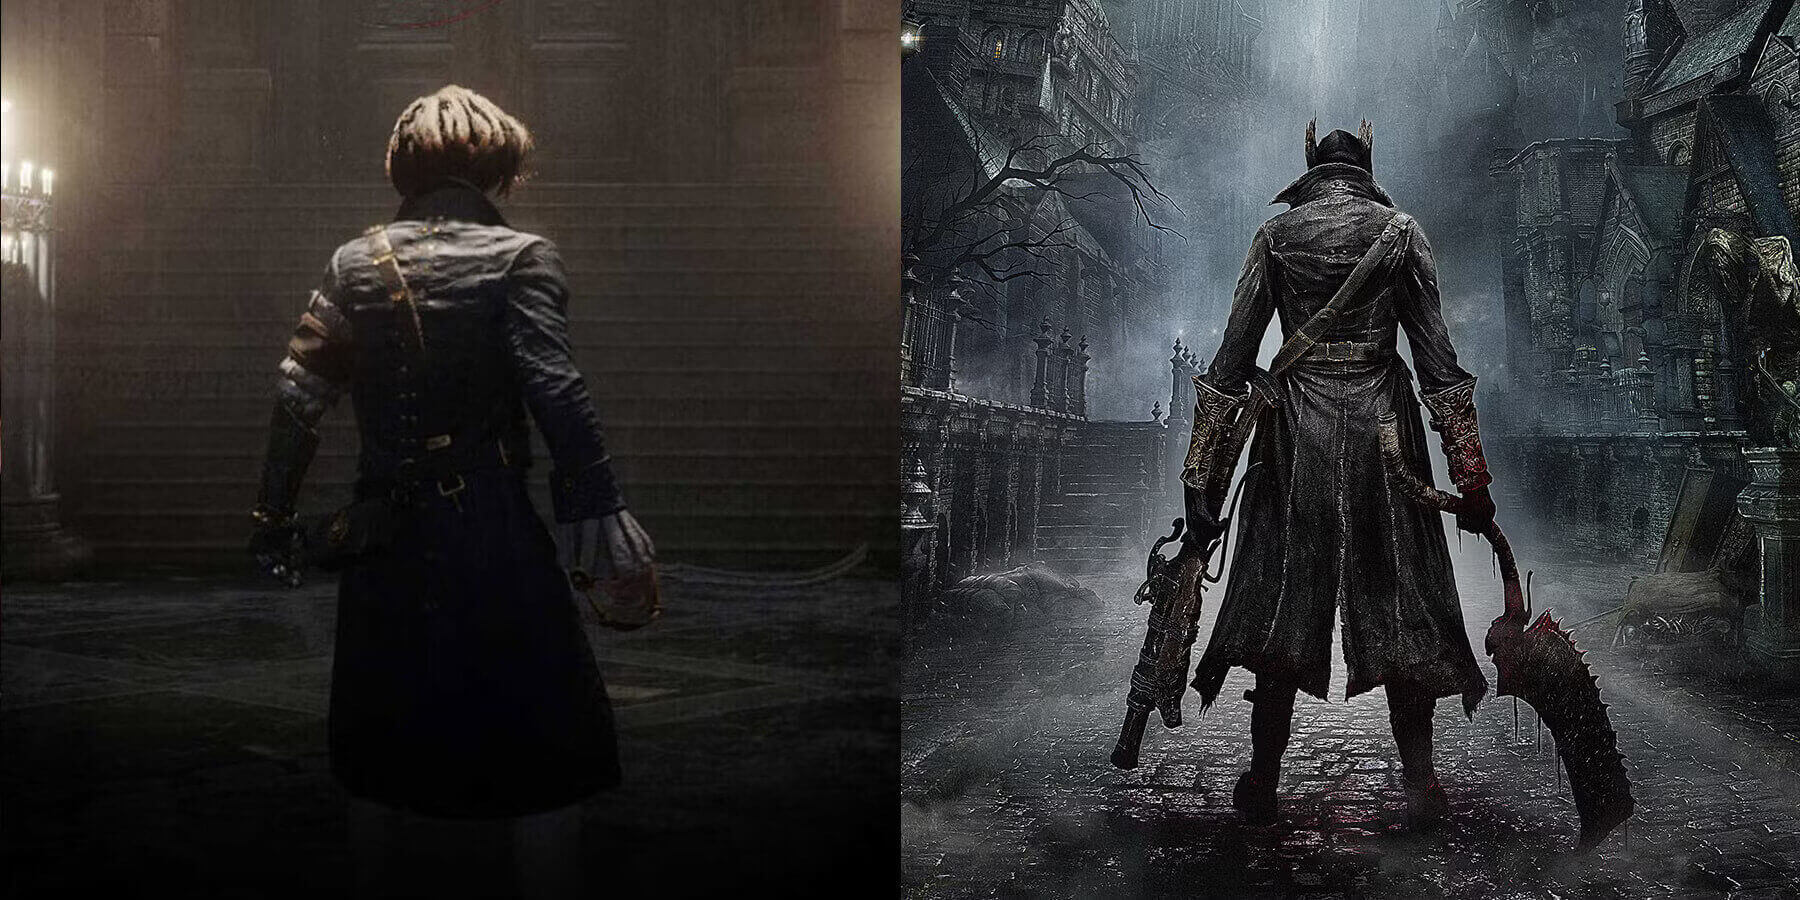 Lies of P's Bloodborne inspiration is the best thing about it